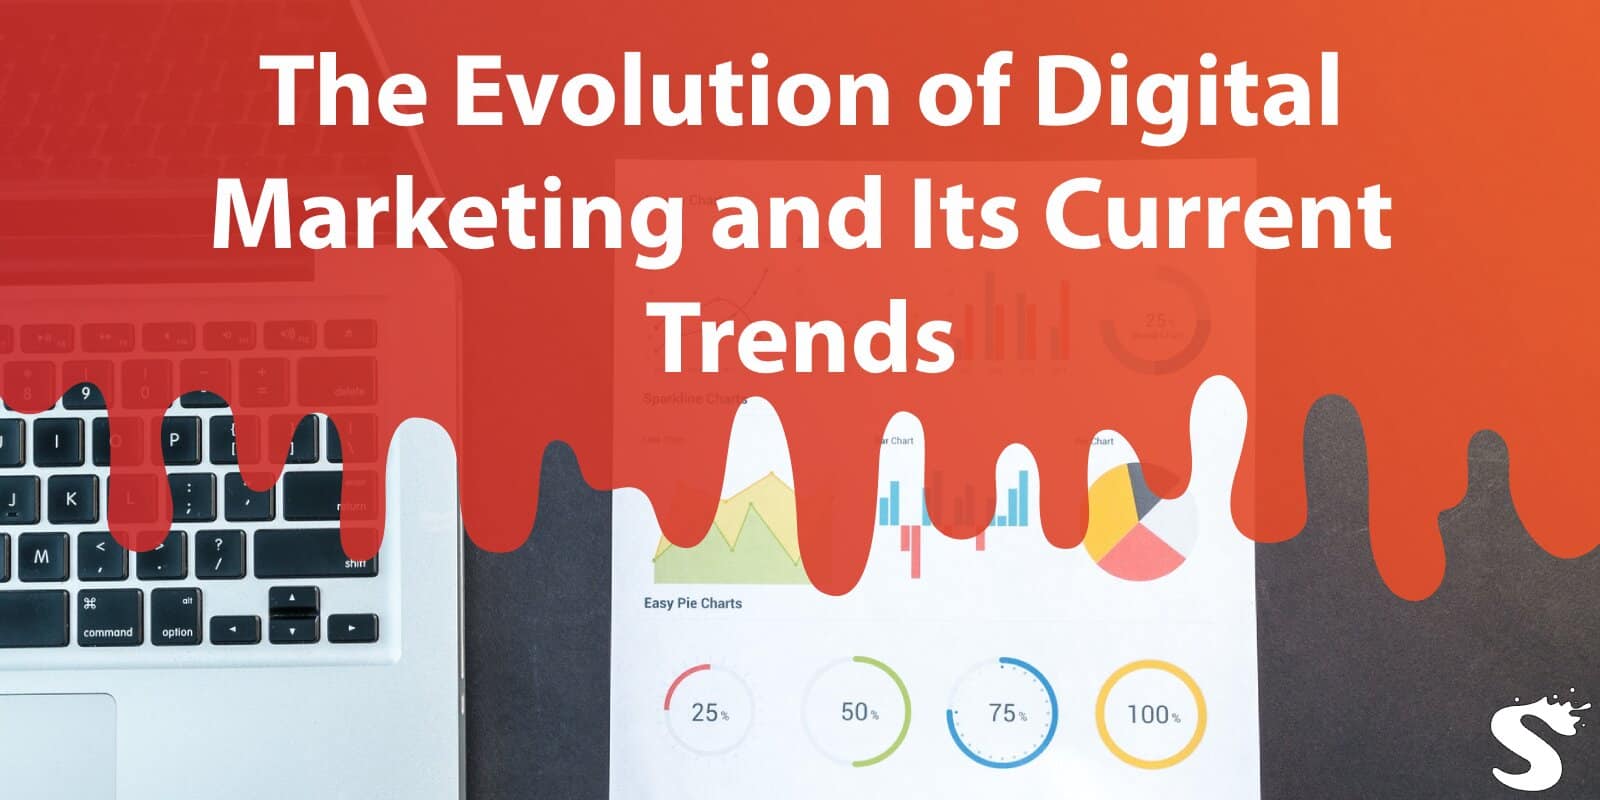 The Evolution of Digital Marketing and Its Current Trends